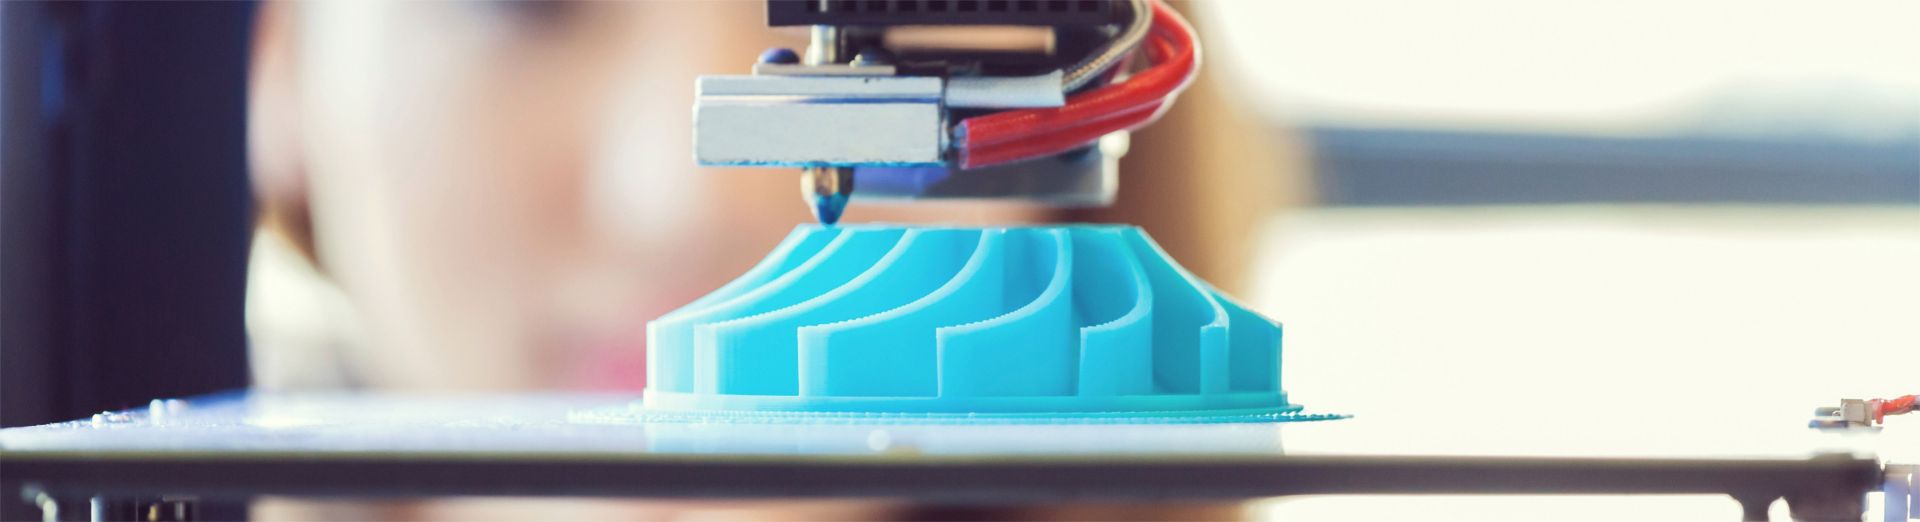 A young woman uses 3D printing technology